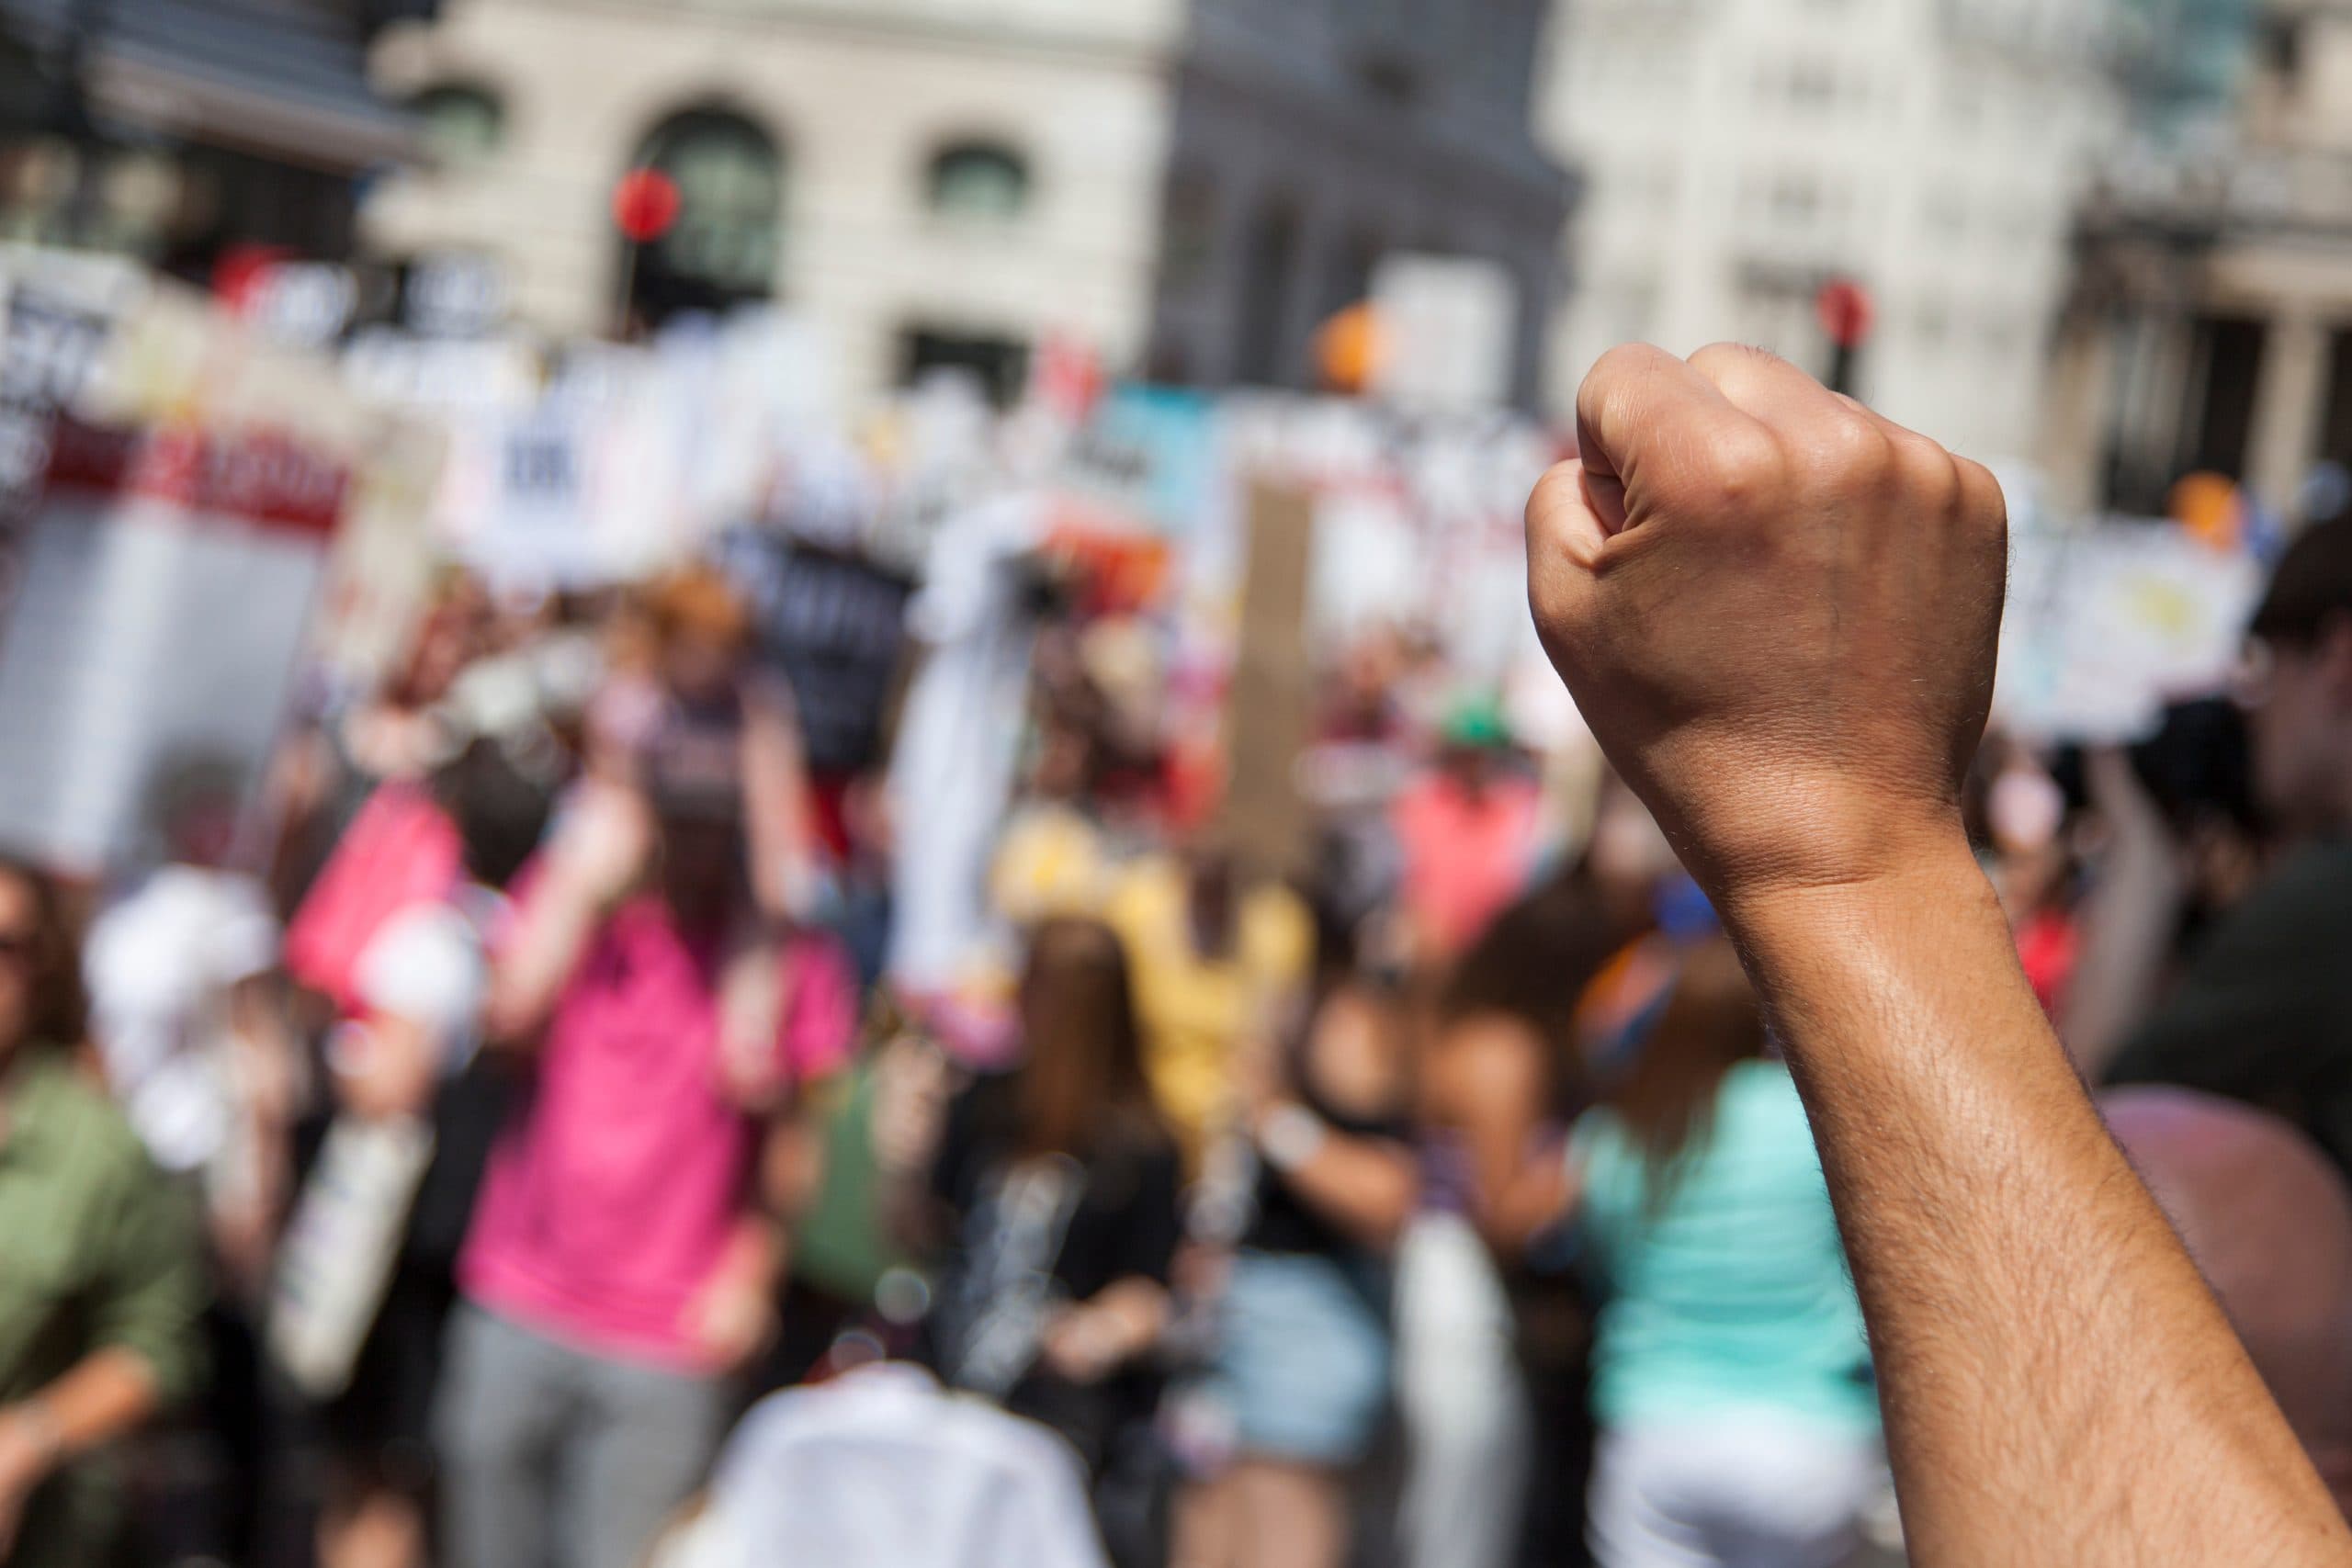 A raised fist in protest is in focus, the background shows a group of others campaigning